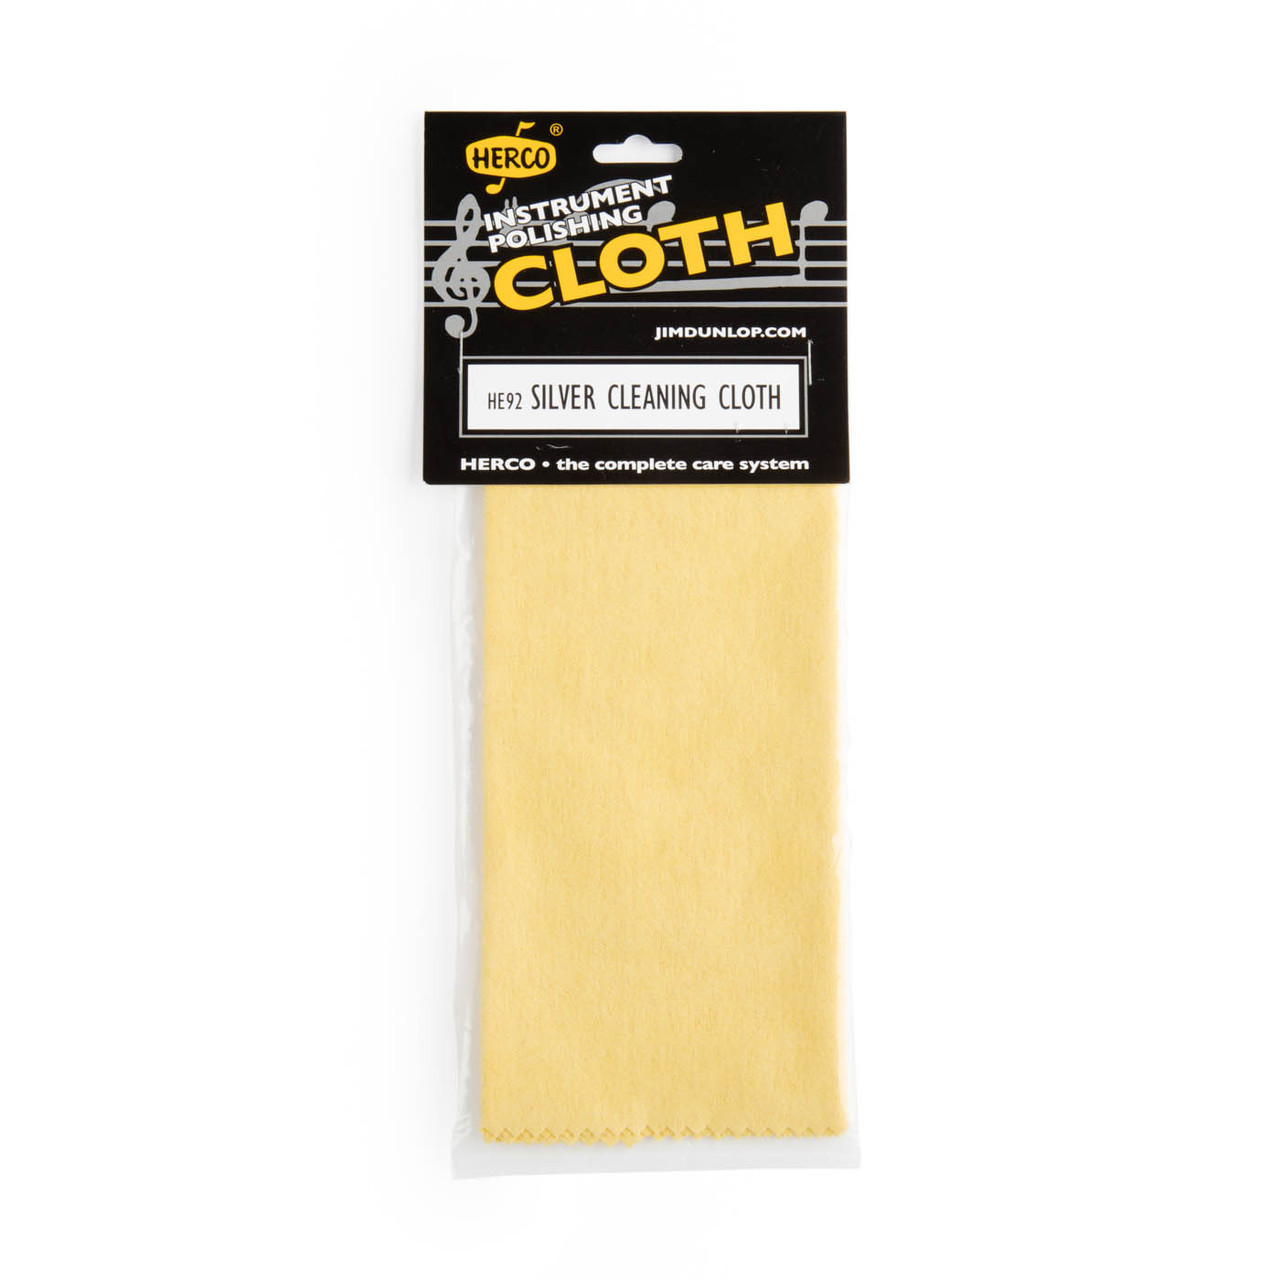 HERCO SILVER CLEANING CLOTH - Dunlop